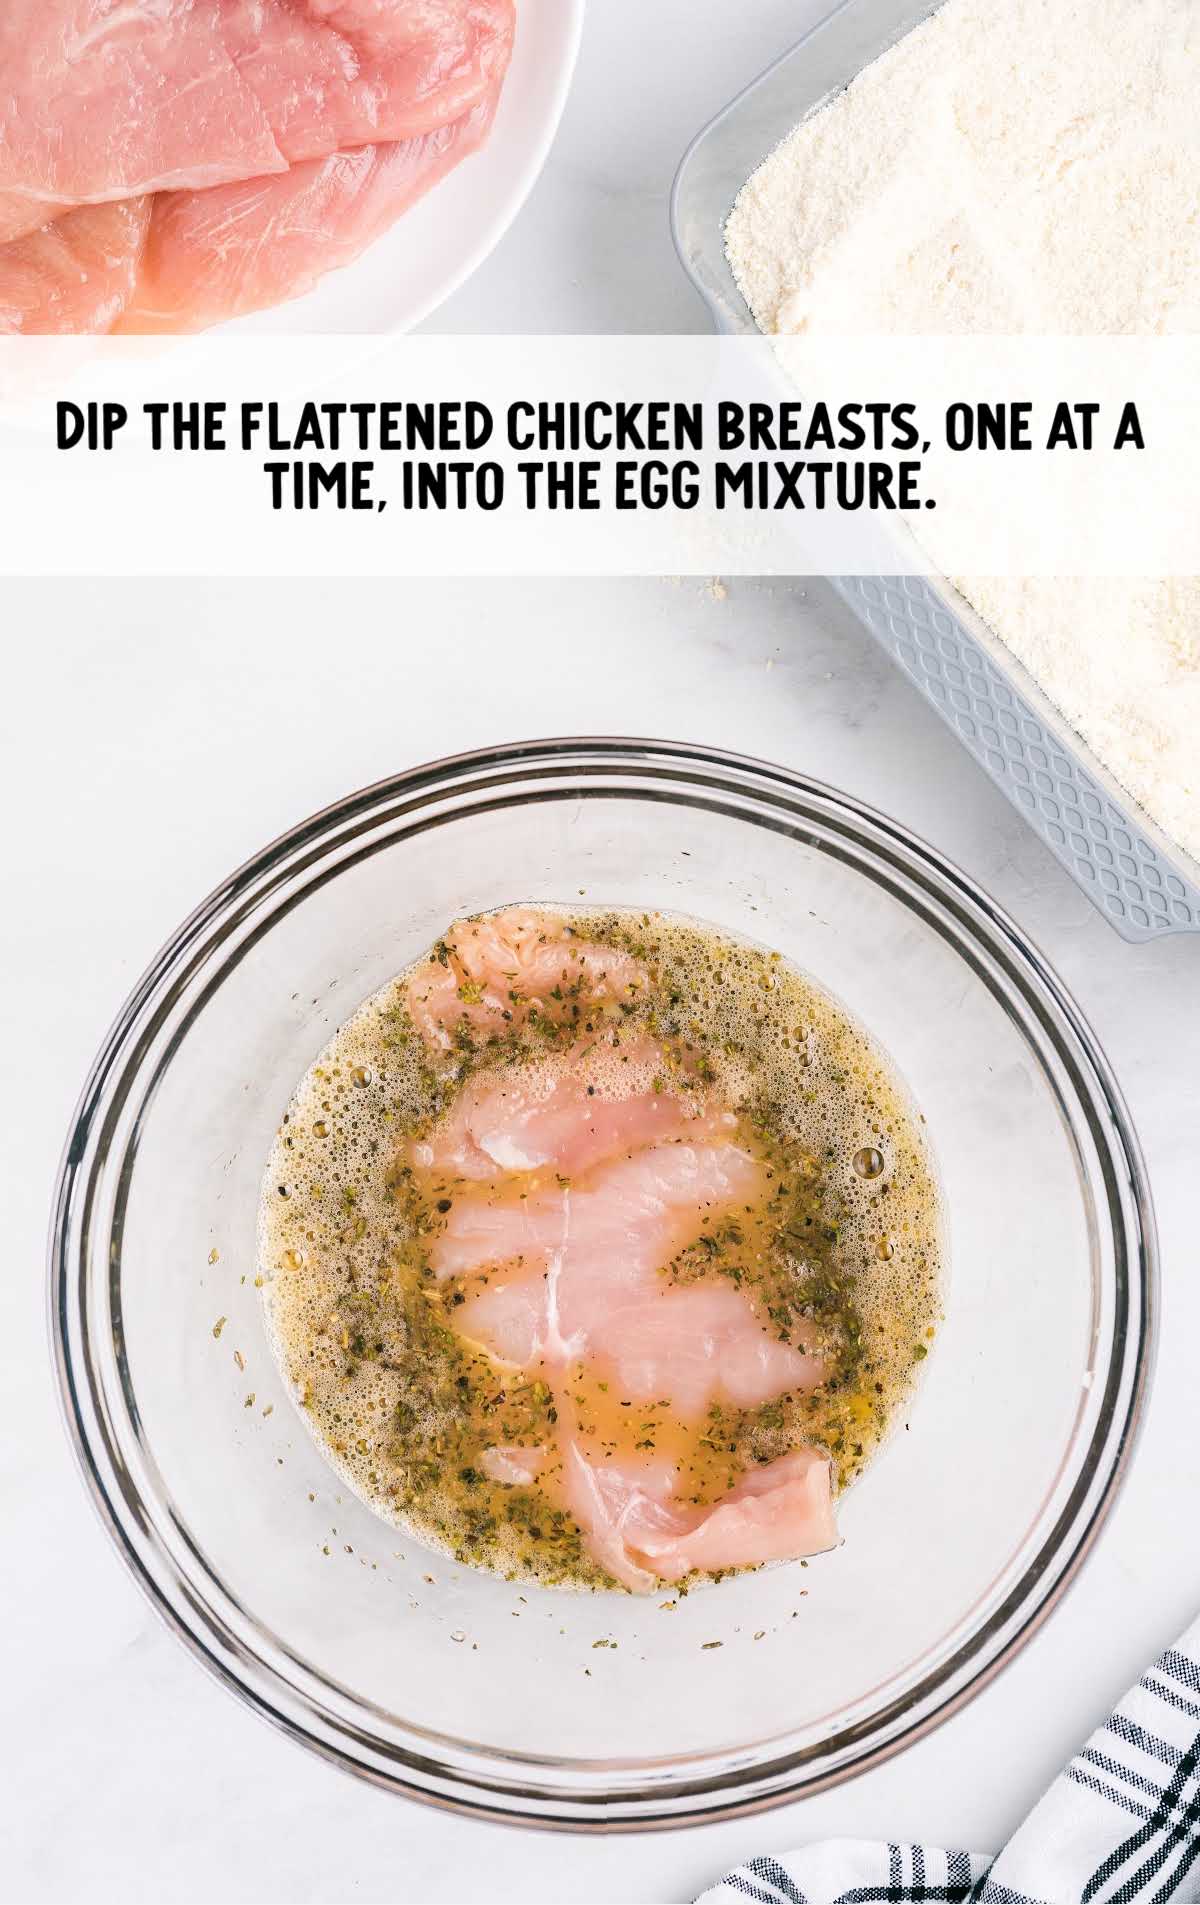 chicken breast dipped into the egg mixture in a bowl